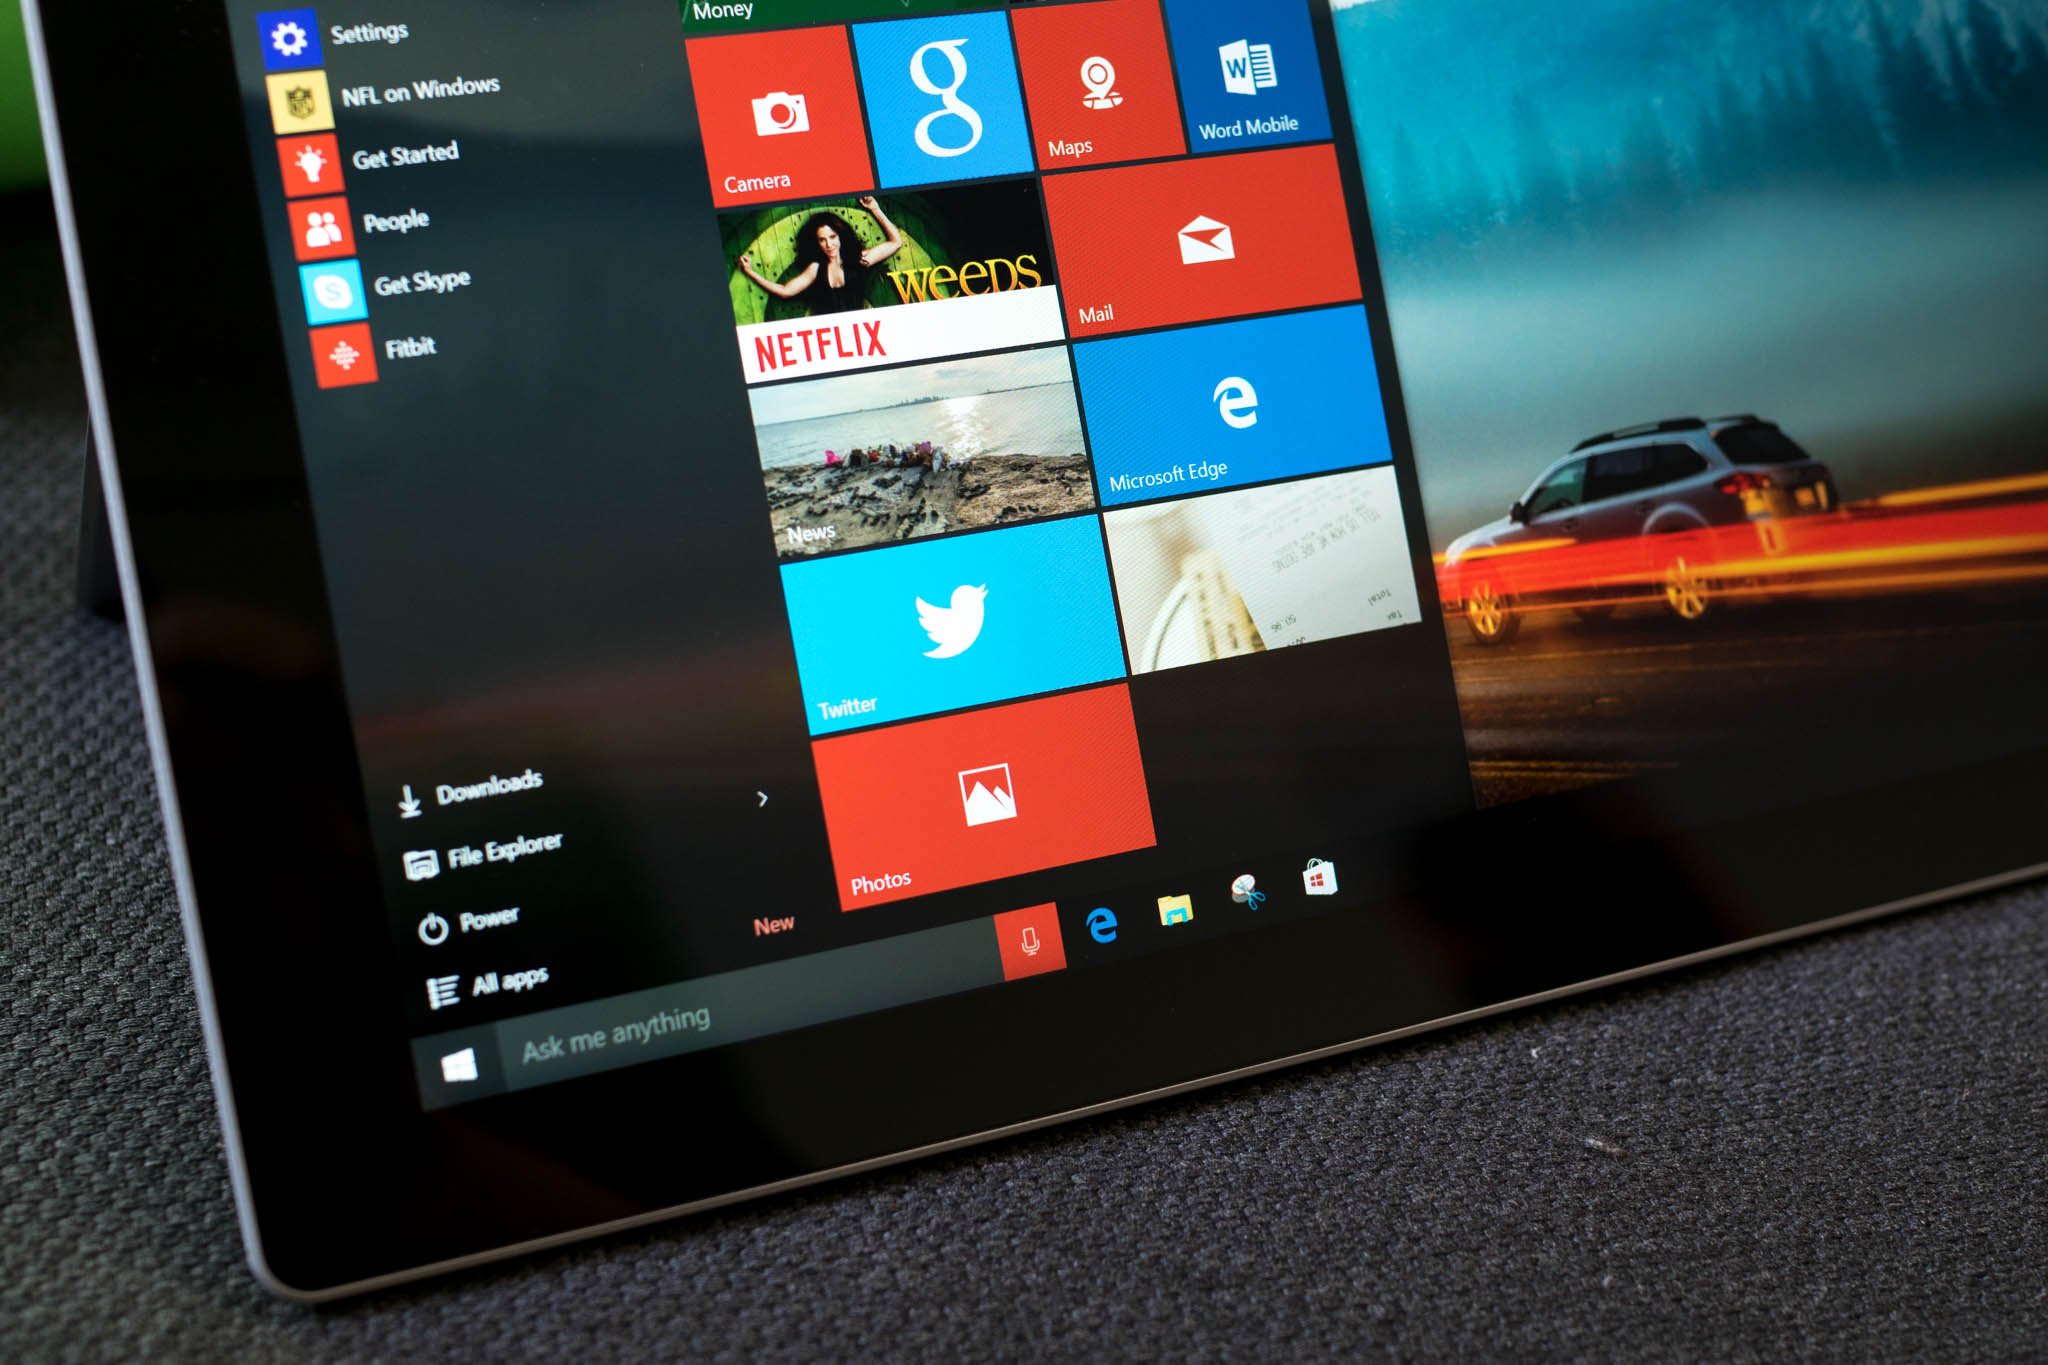 Microsoft reportedly winding down development on some apps that ship with Windows 10